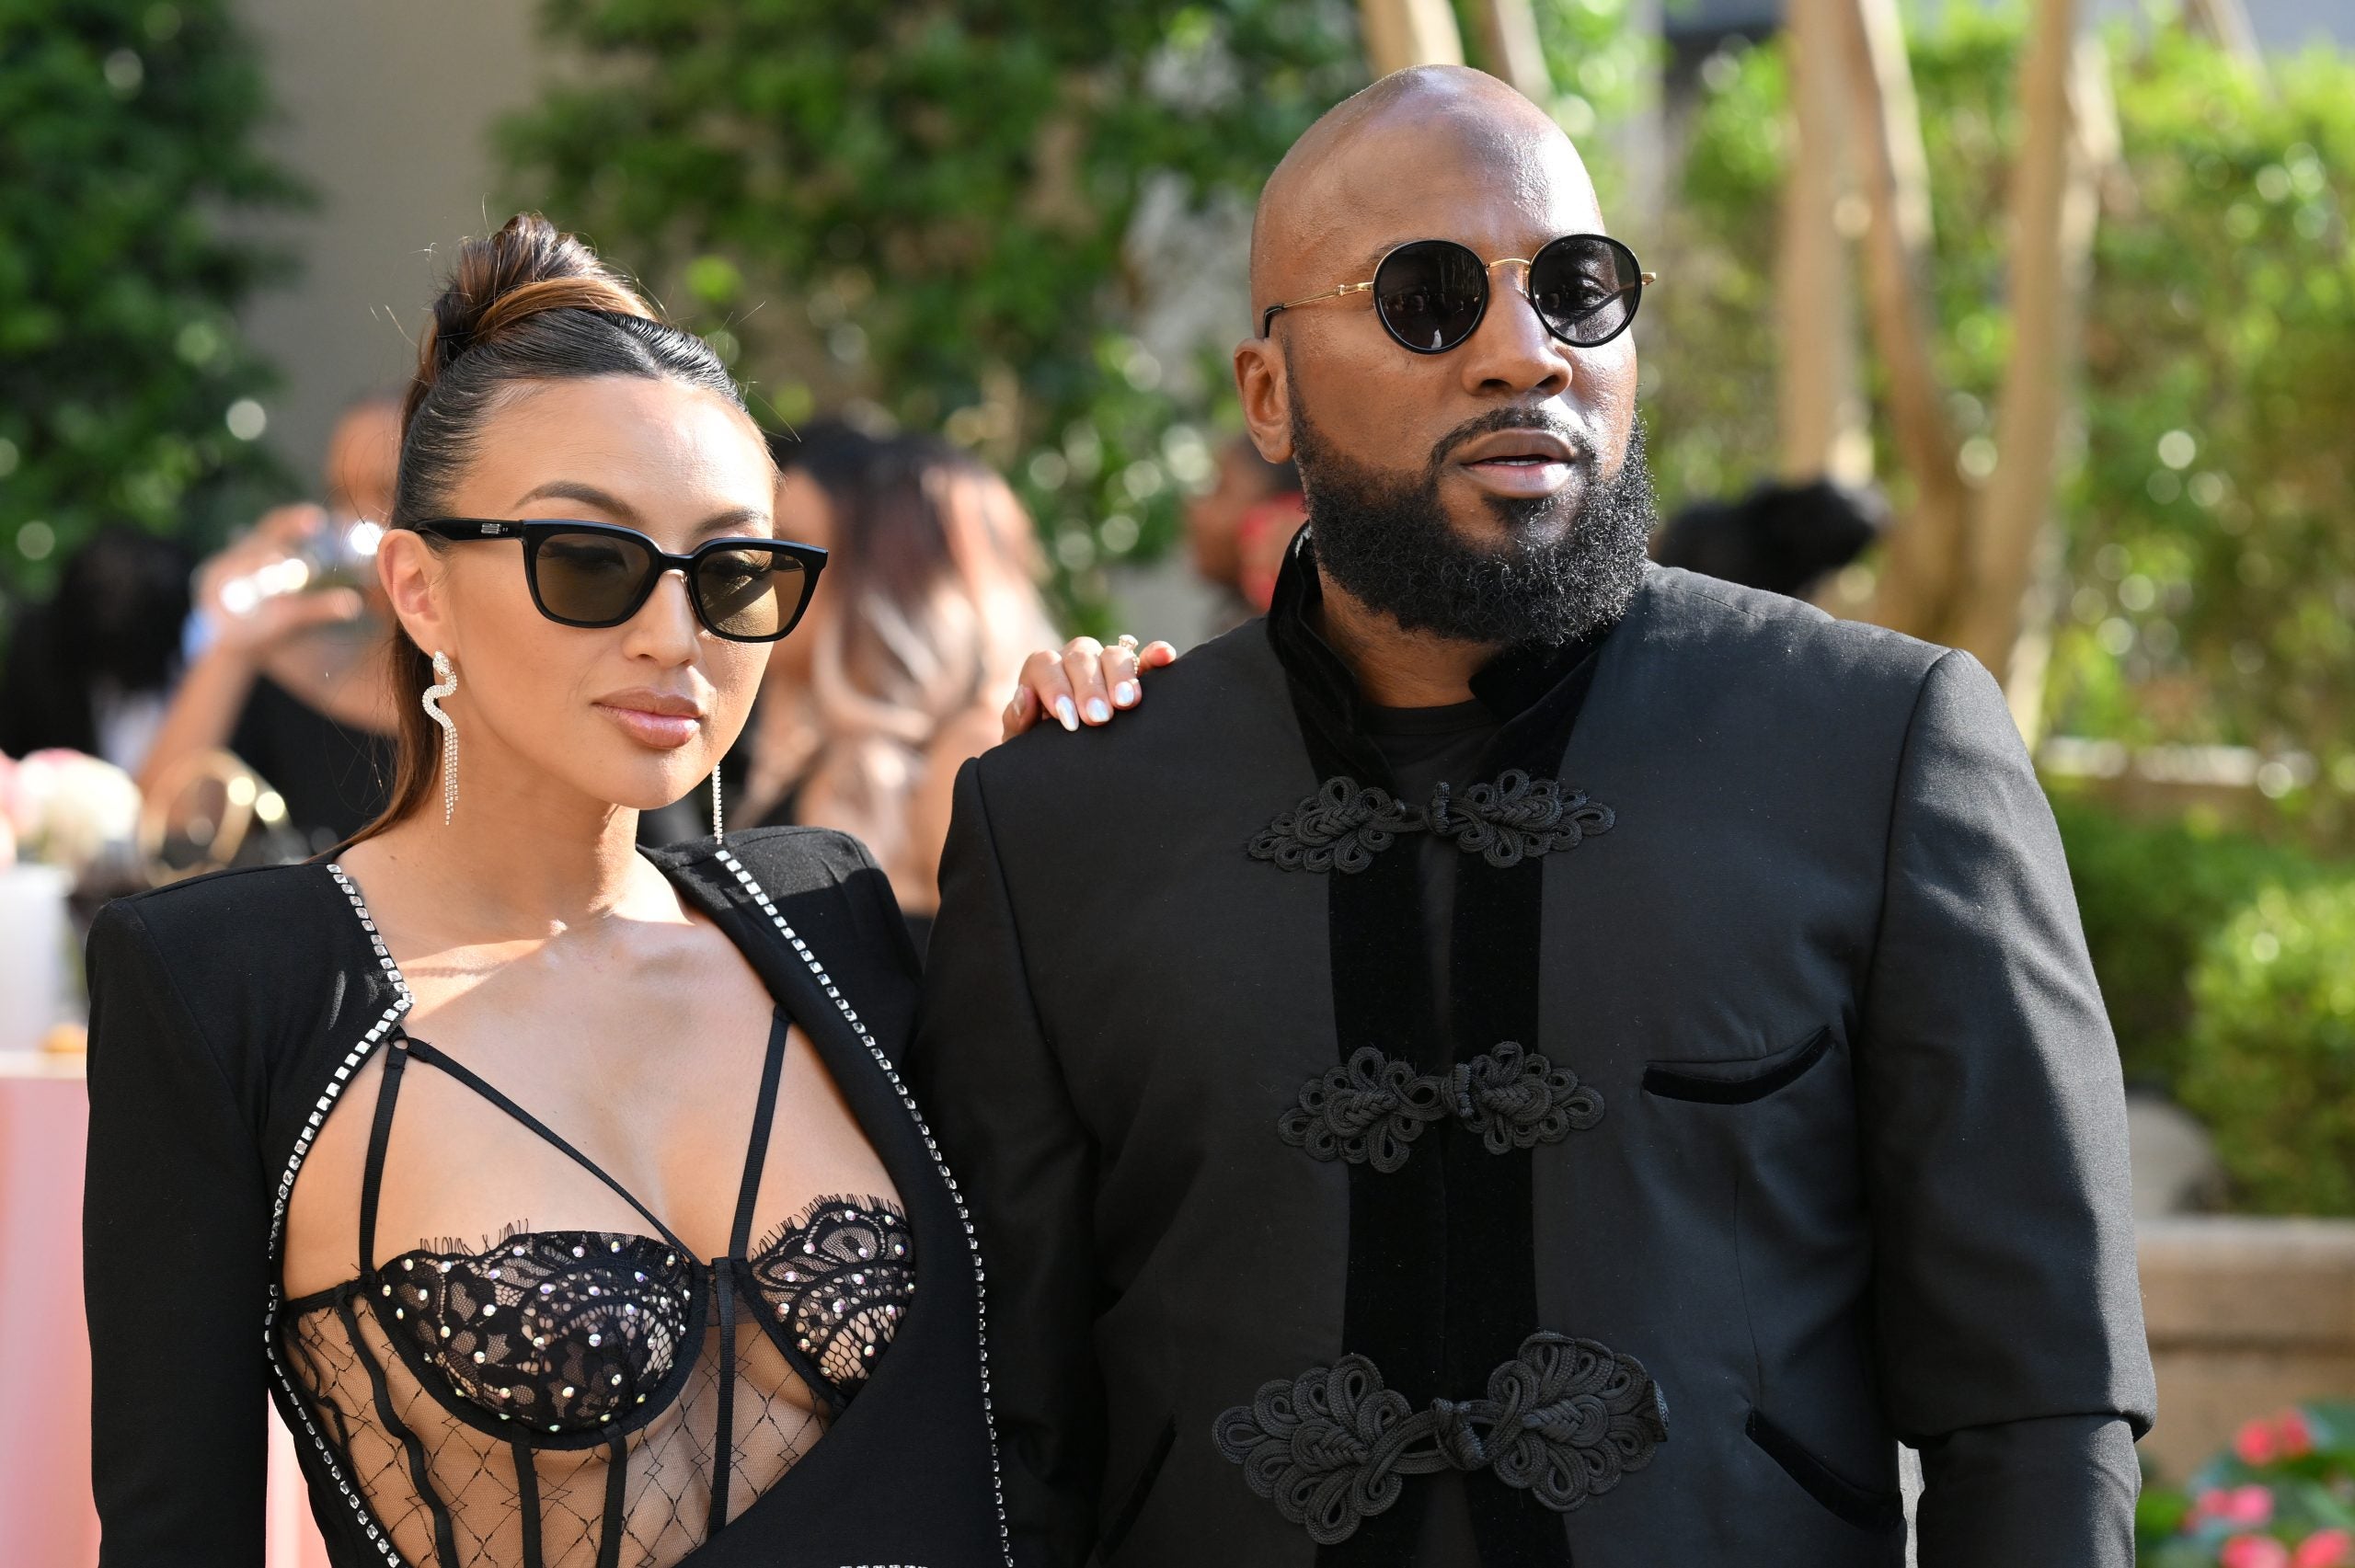 Jeezy Publicly Responds To Jeannie Mai's Claims Of Domestic Violence: 'Y'all Know Me'